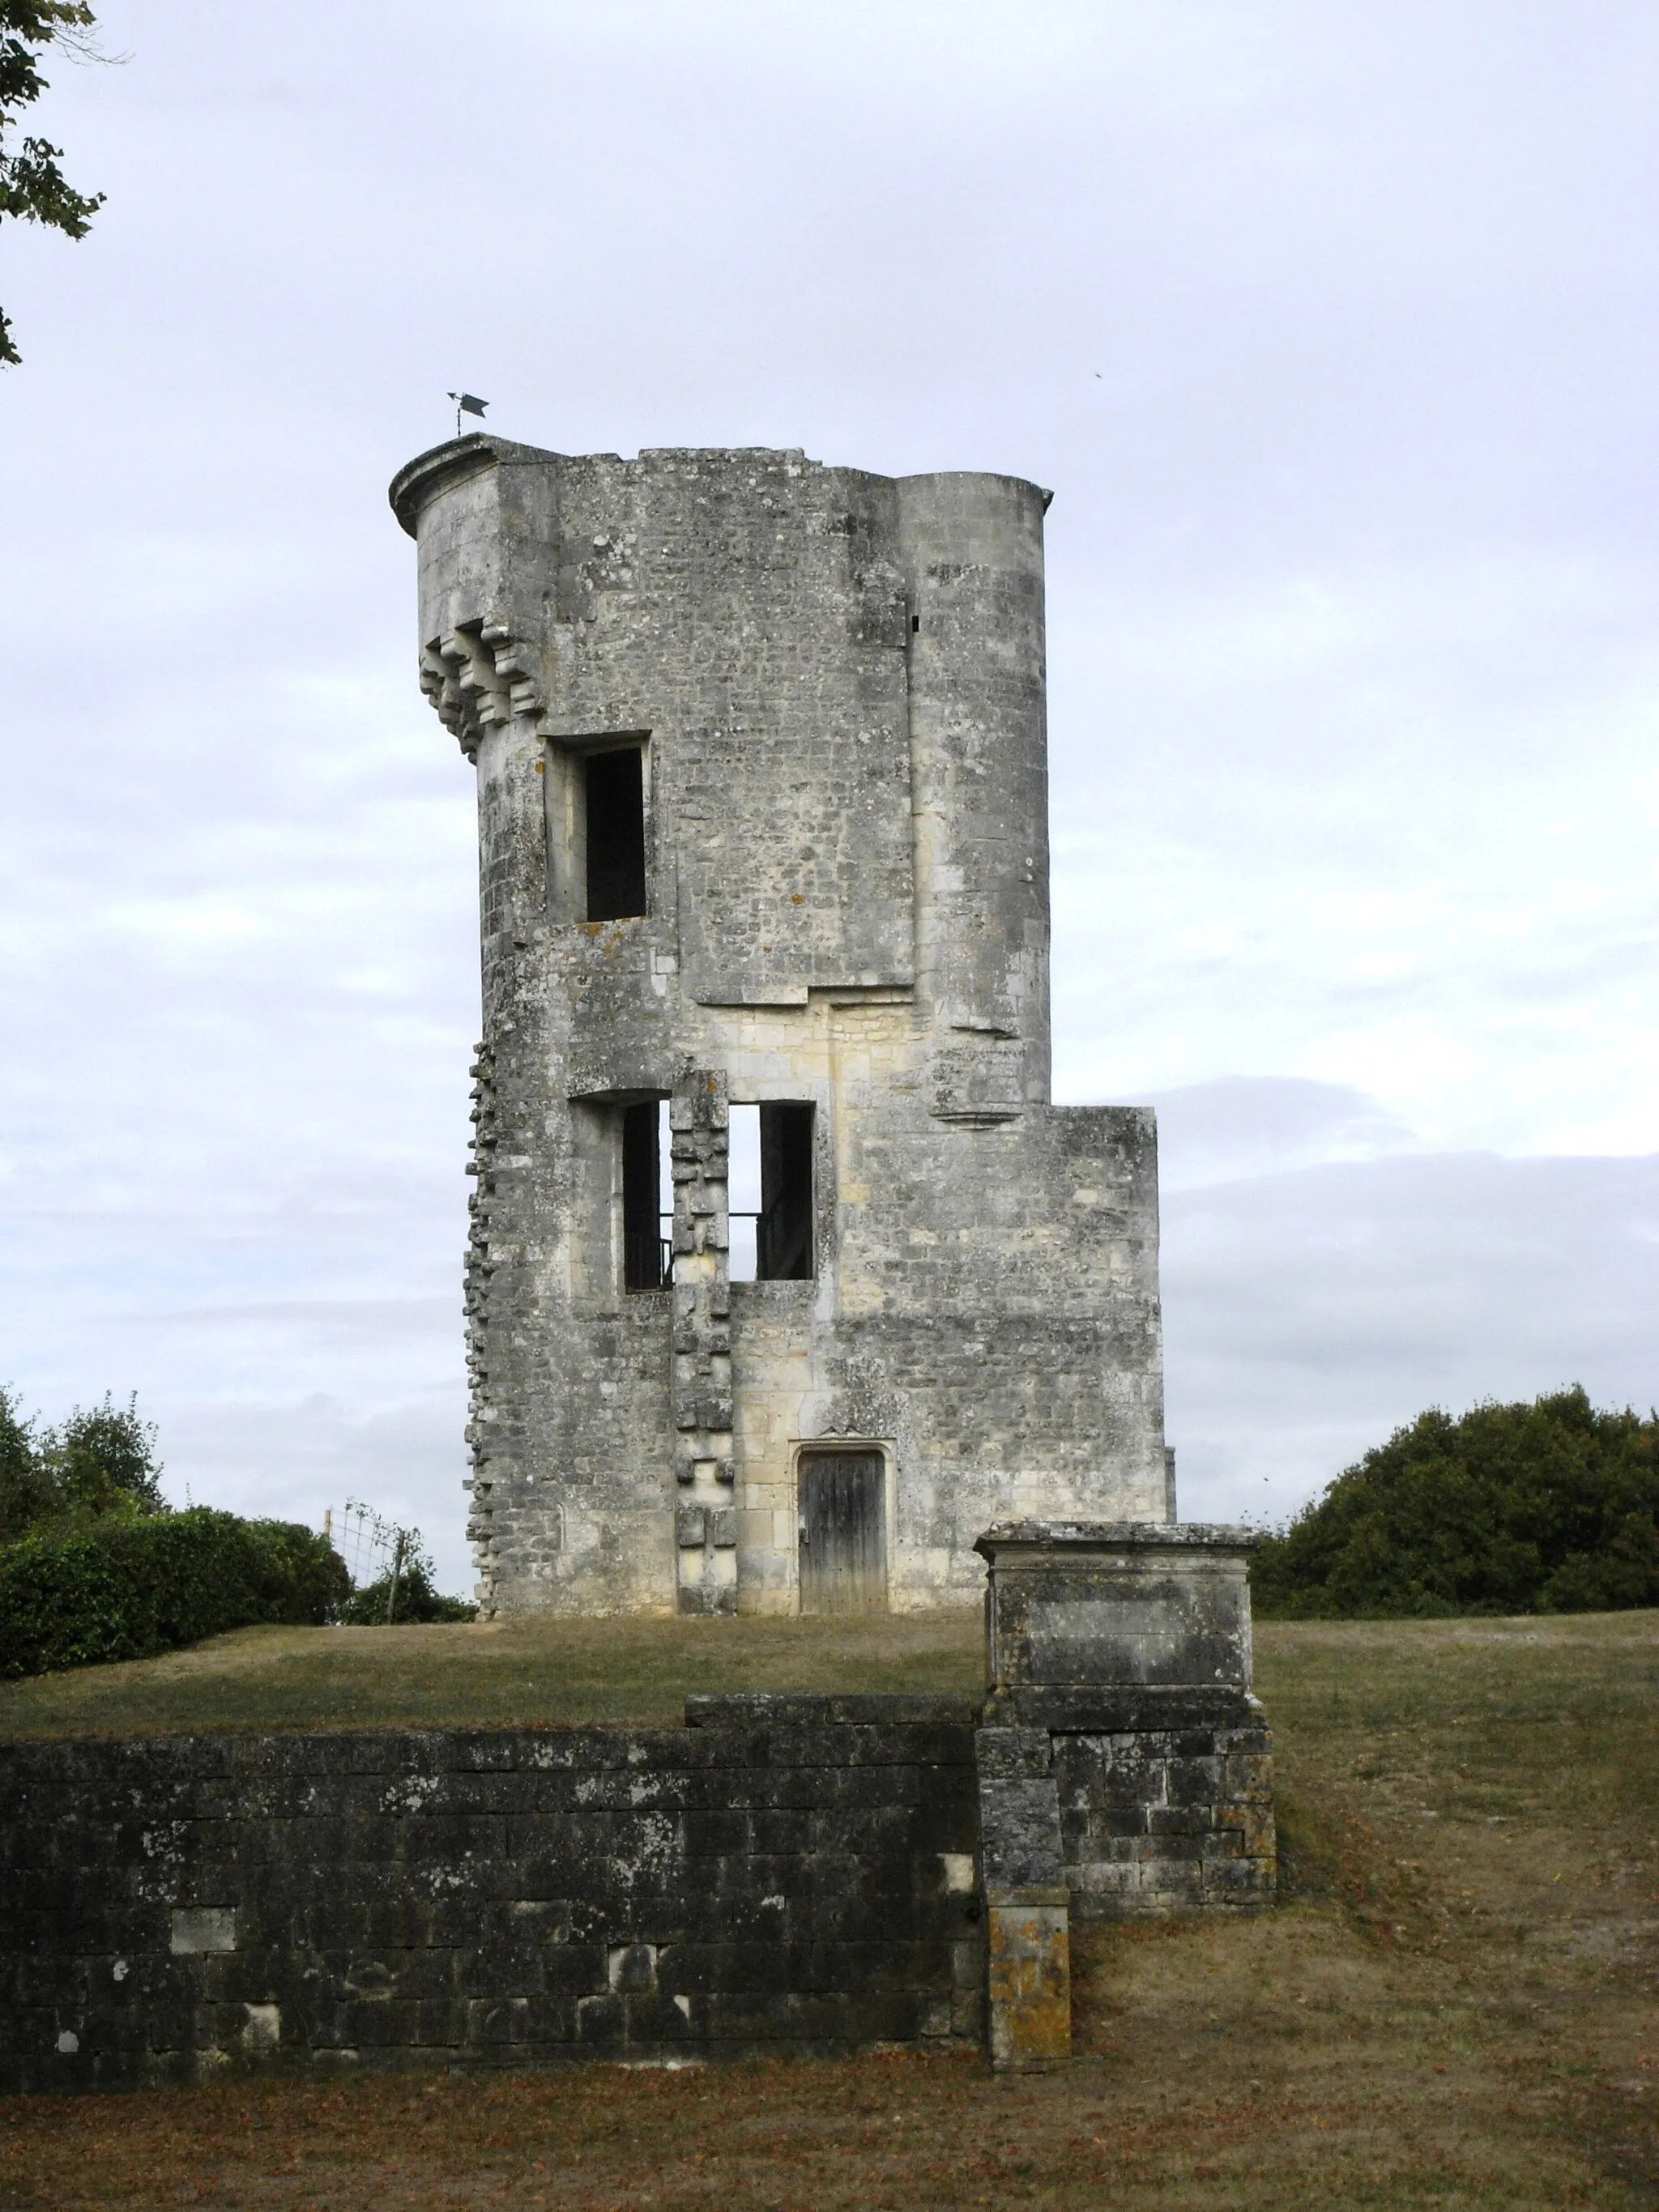 Photo showing: The ruins of Château de Taillebourg in Charente-Maritime, France